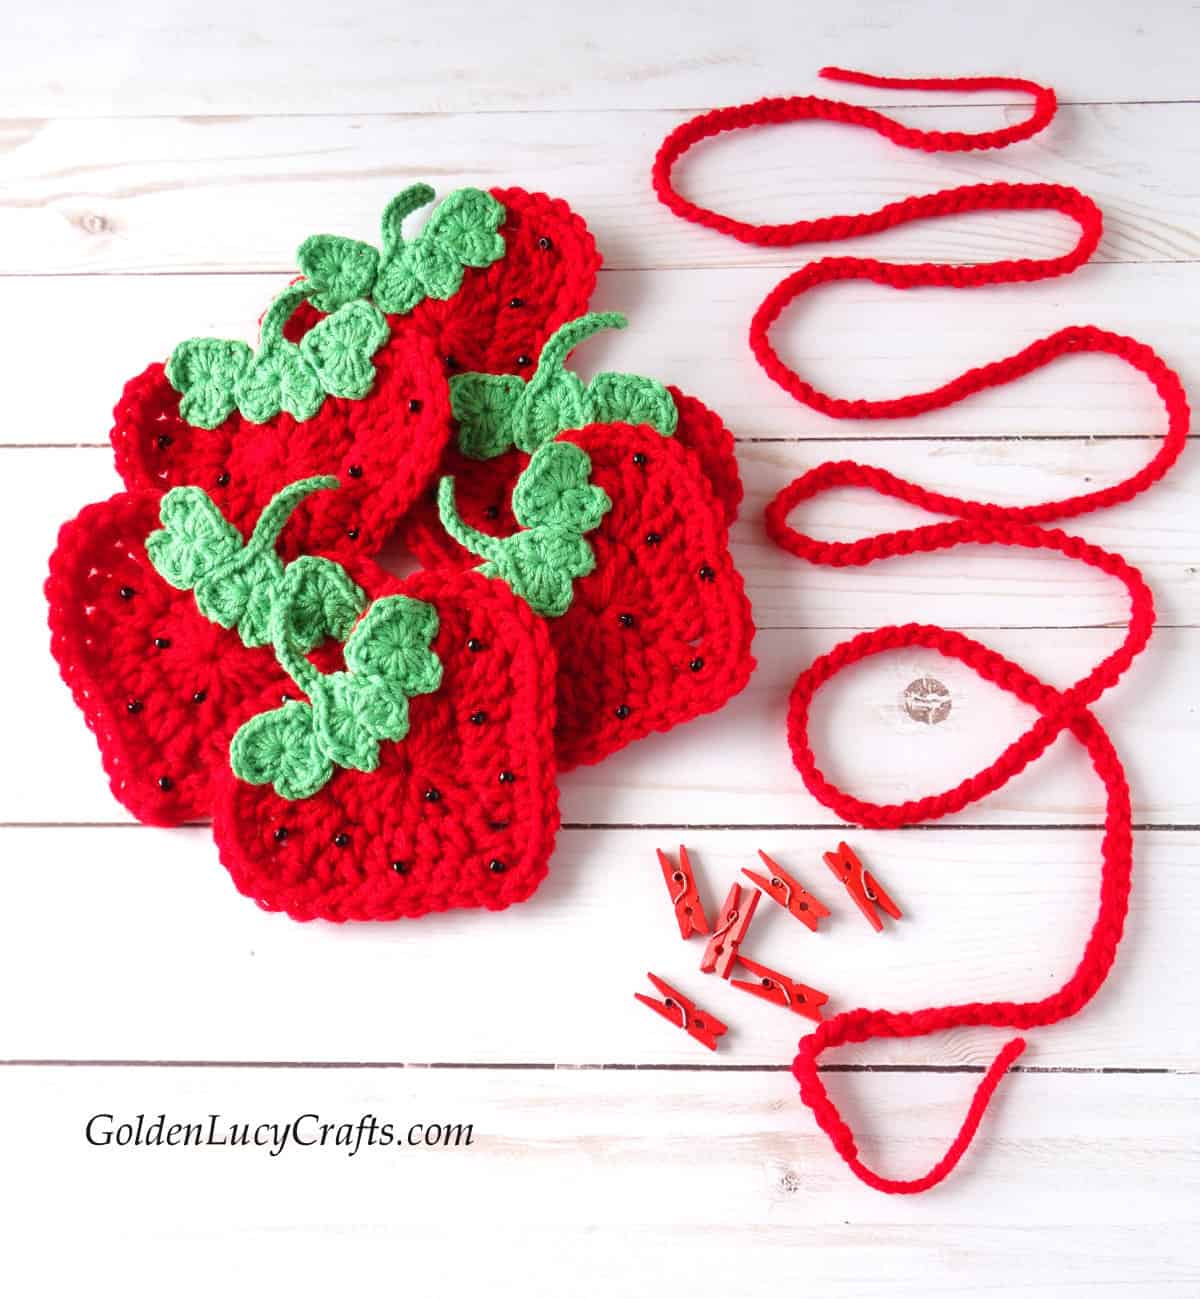 Crocheted strawberry appliques, string and small craft clothespins.